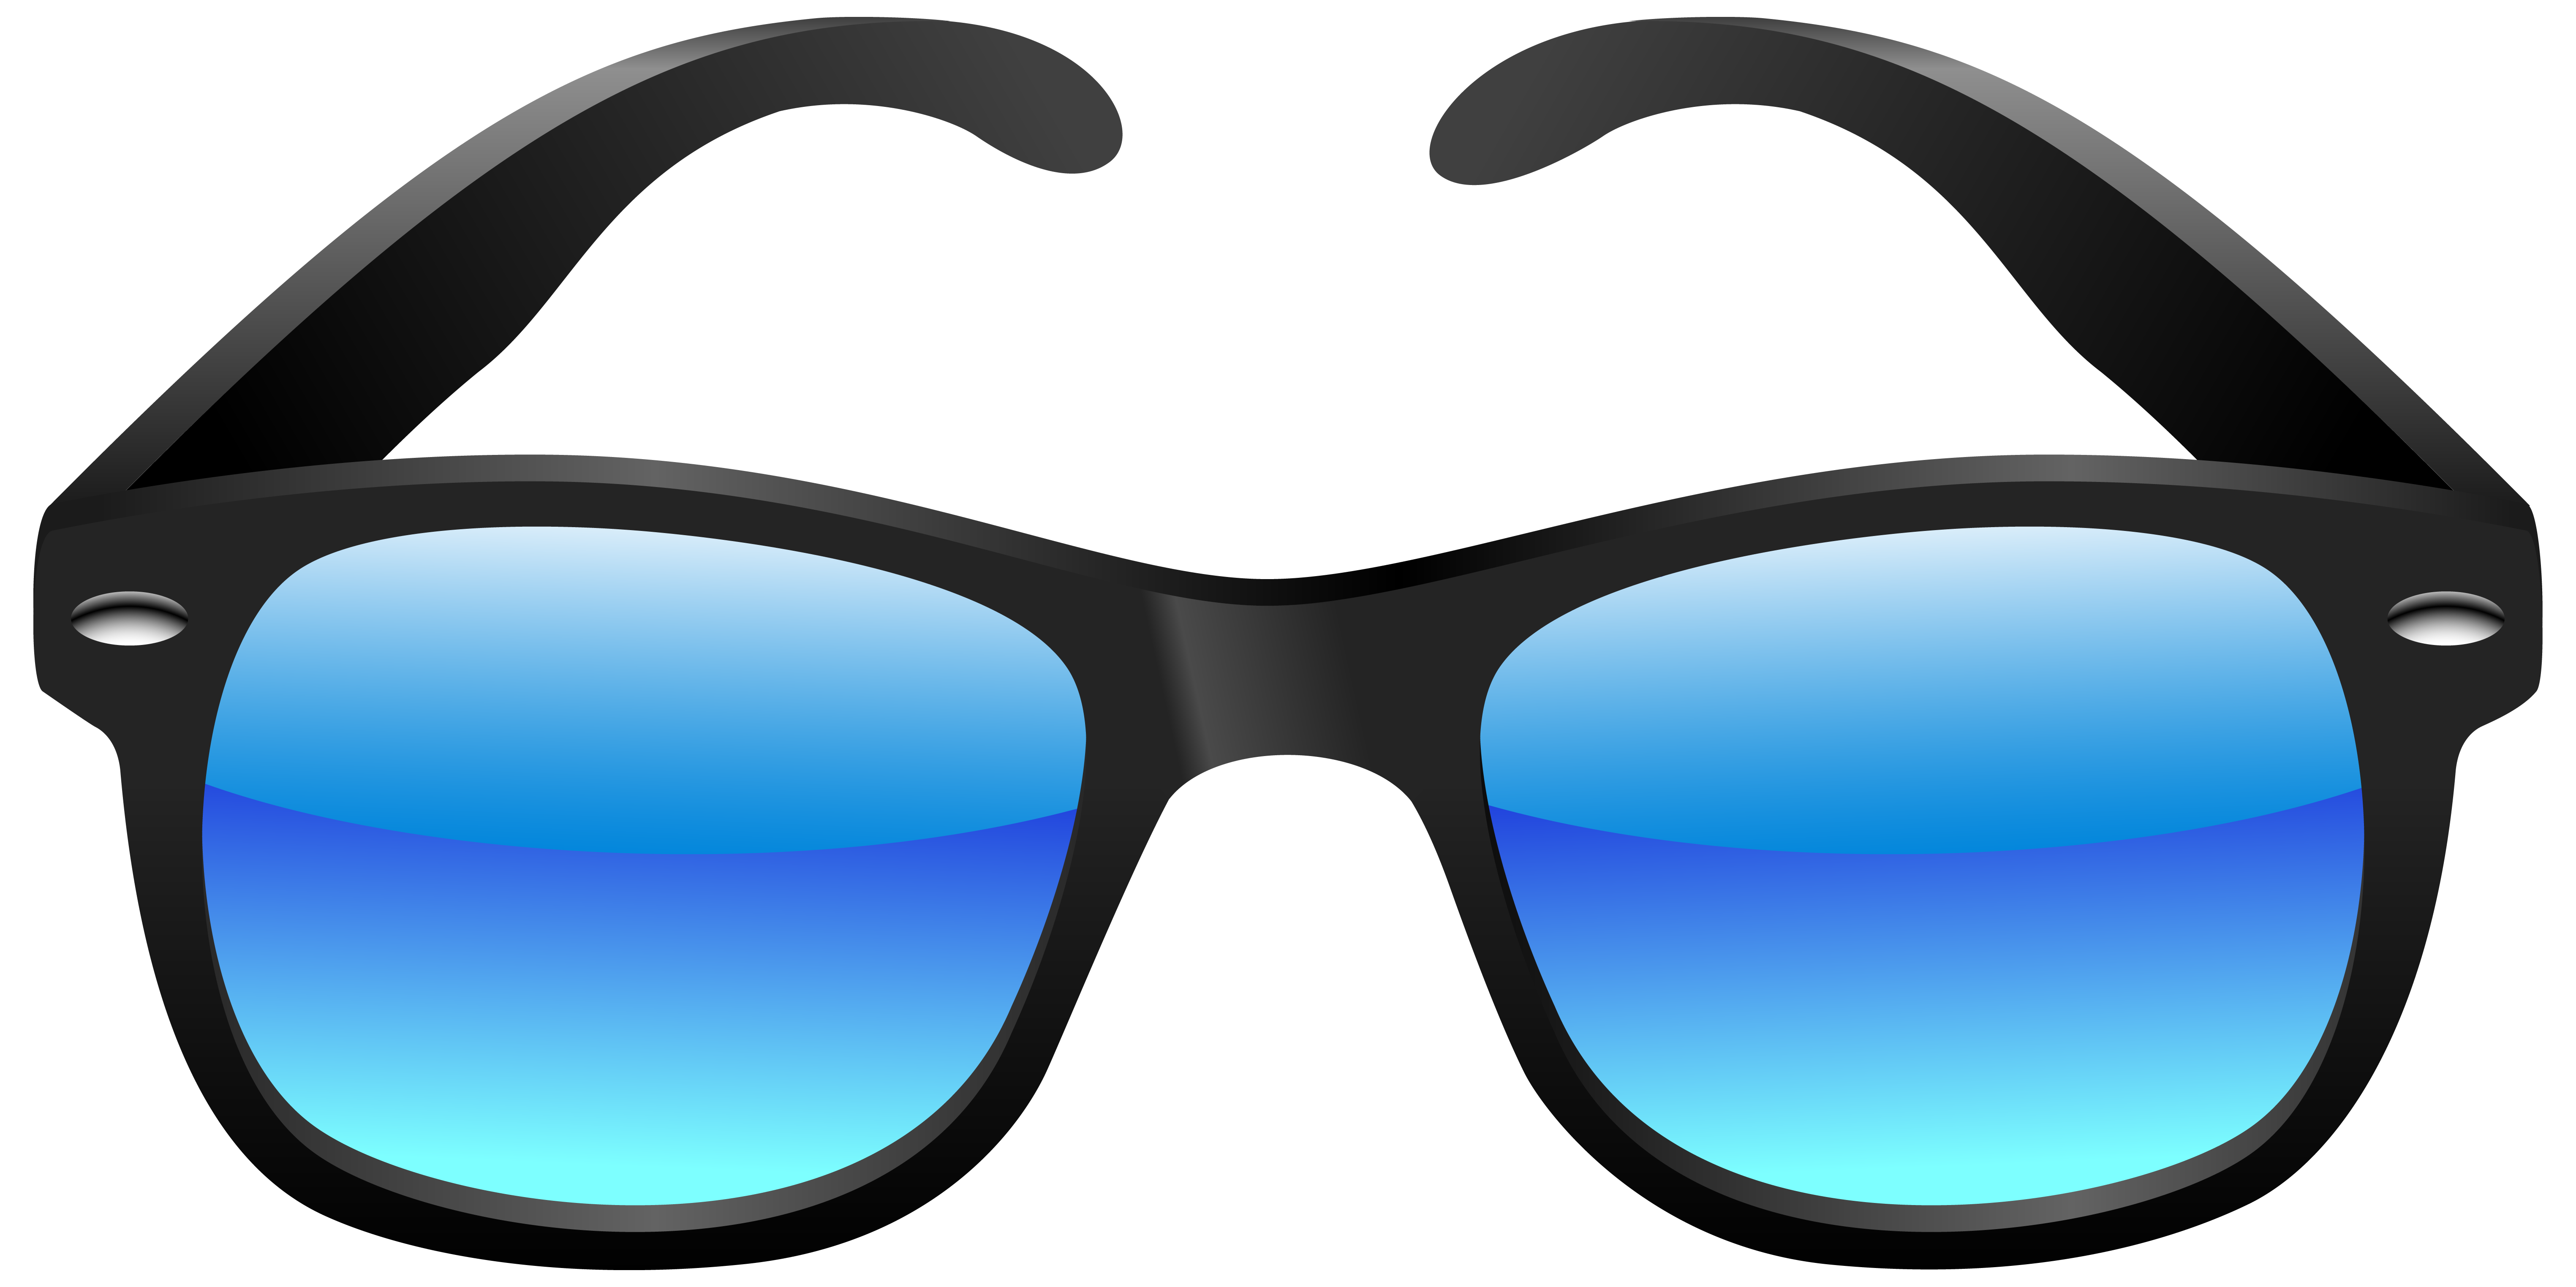 Black And Blue Sunglasses Image Hd Photo Clipart